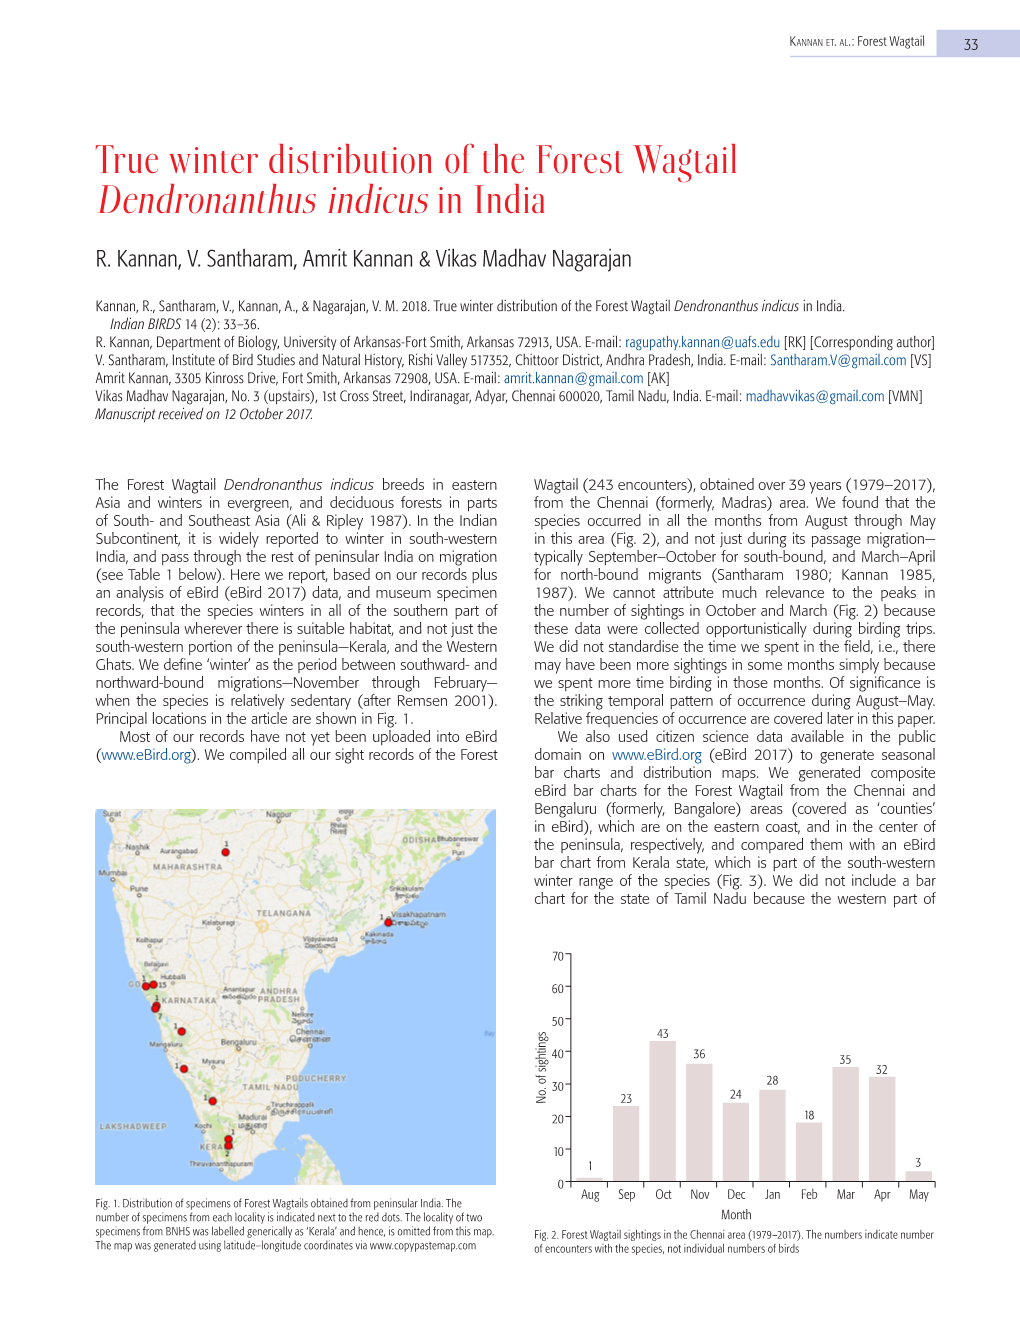 True Winter Distribution of the Forest Wagtail Dendronanthus Indicus in India